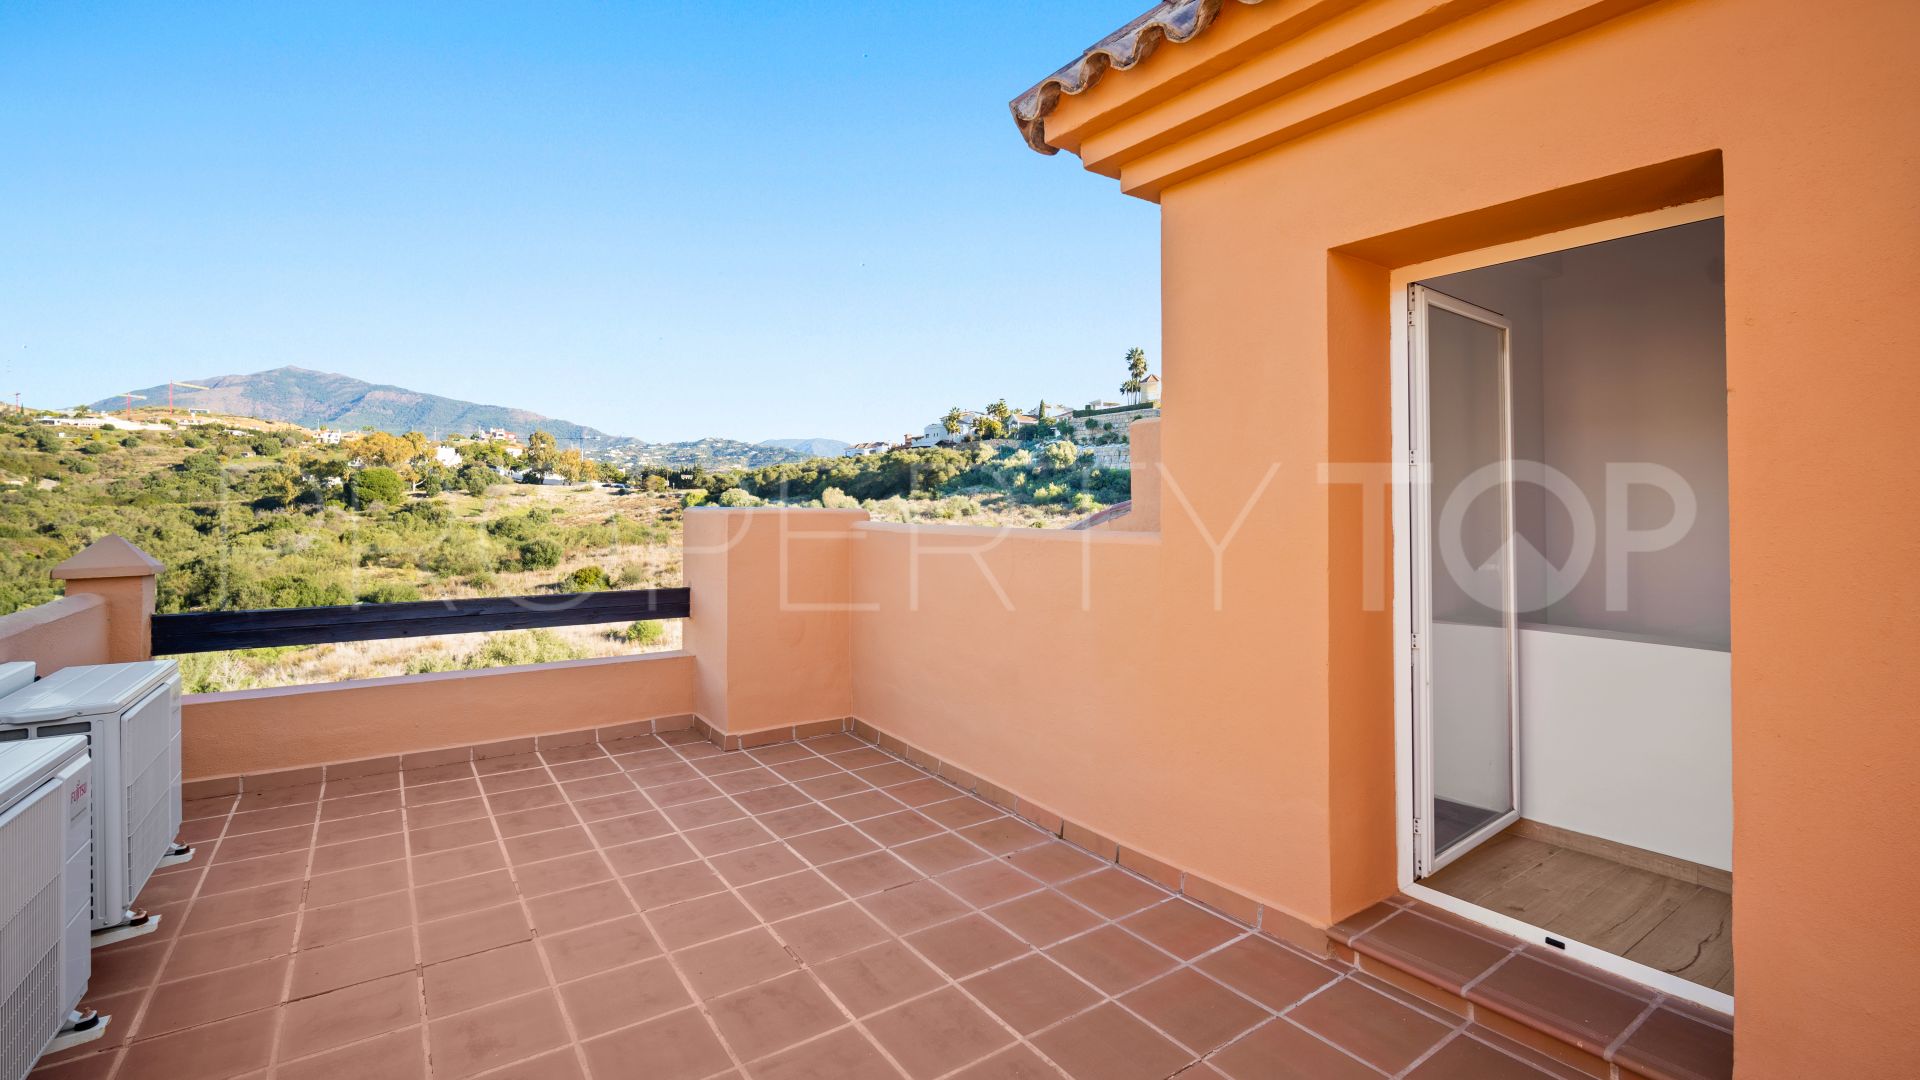 3 bedrooms Paraíso Bellevue town house for sale